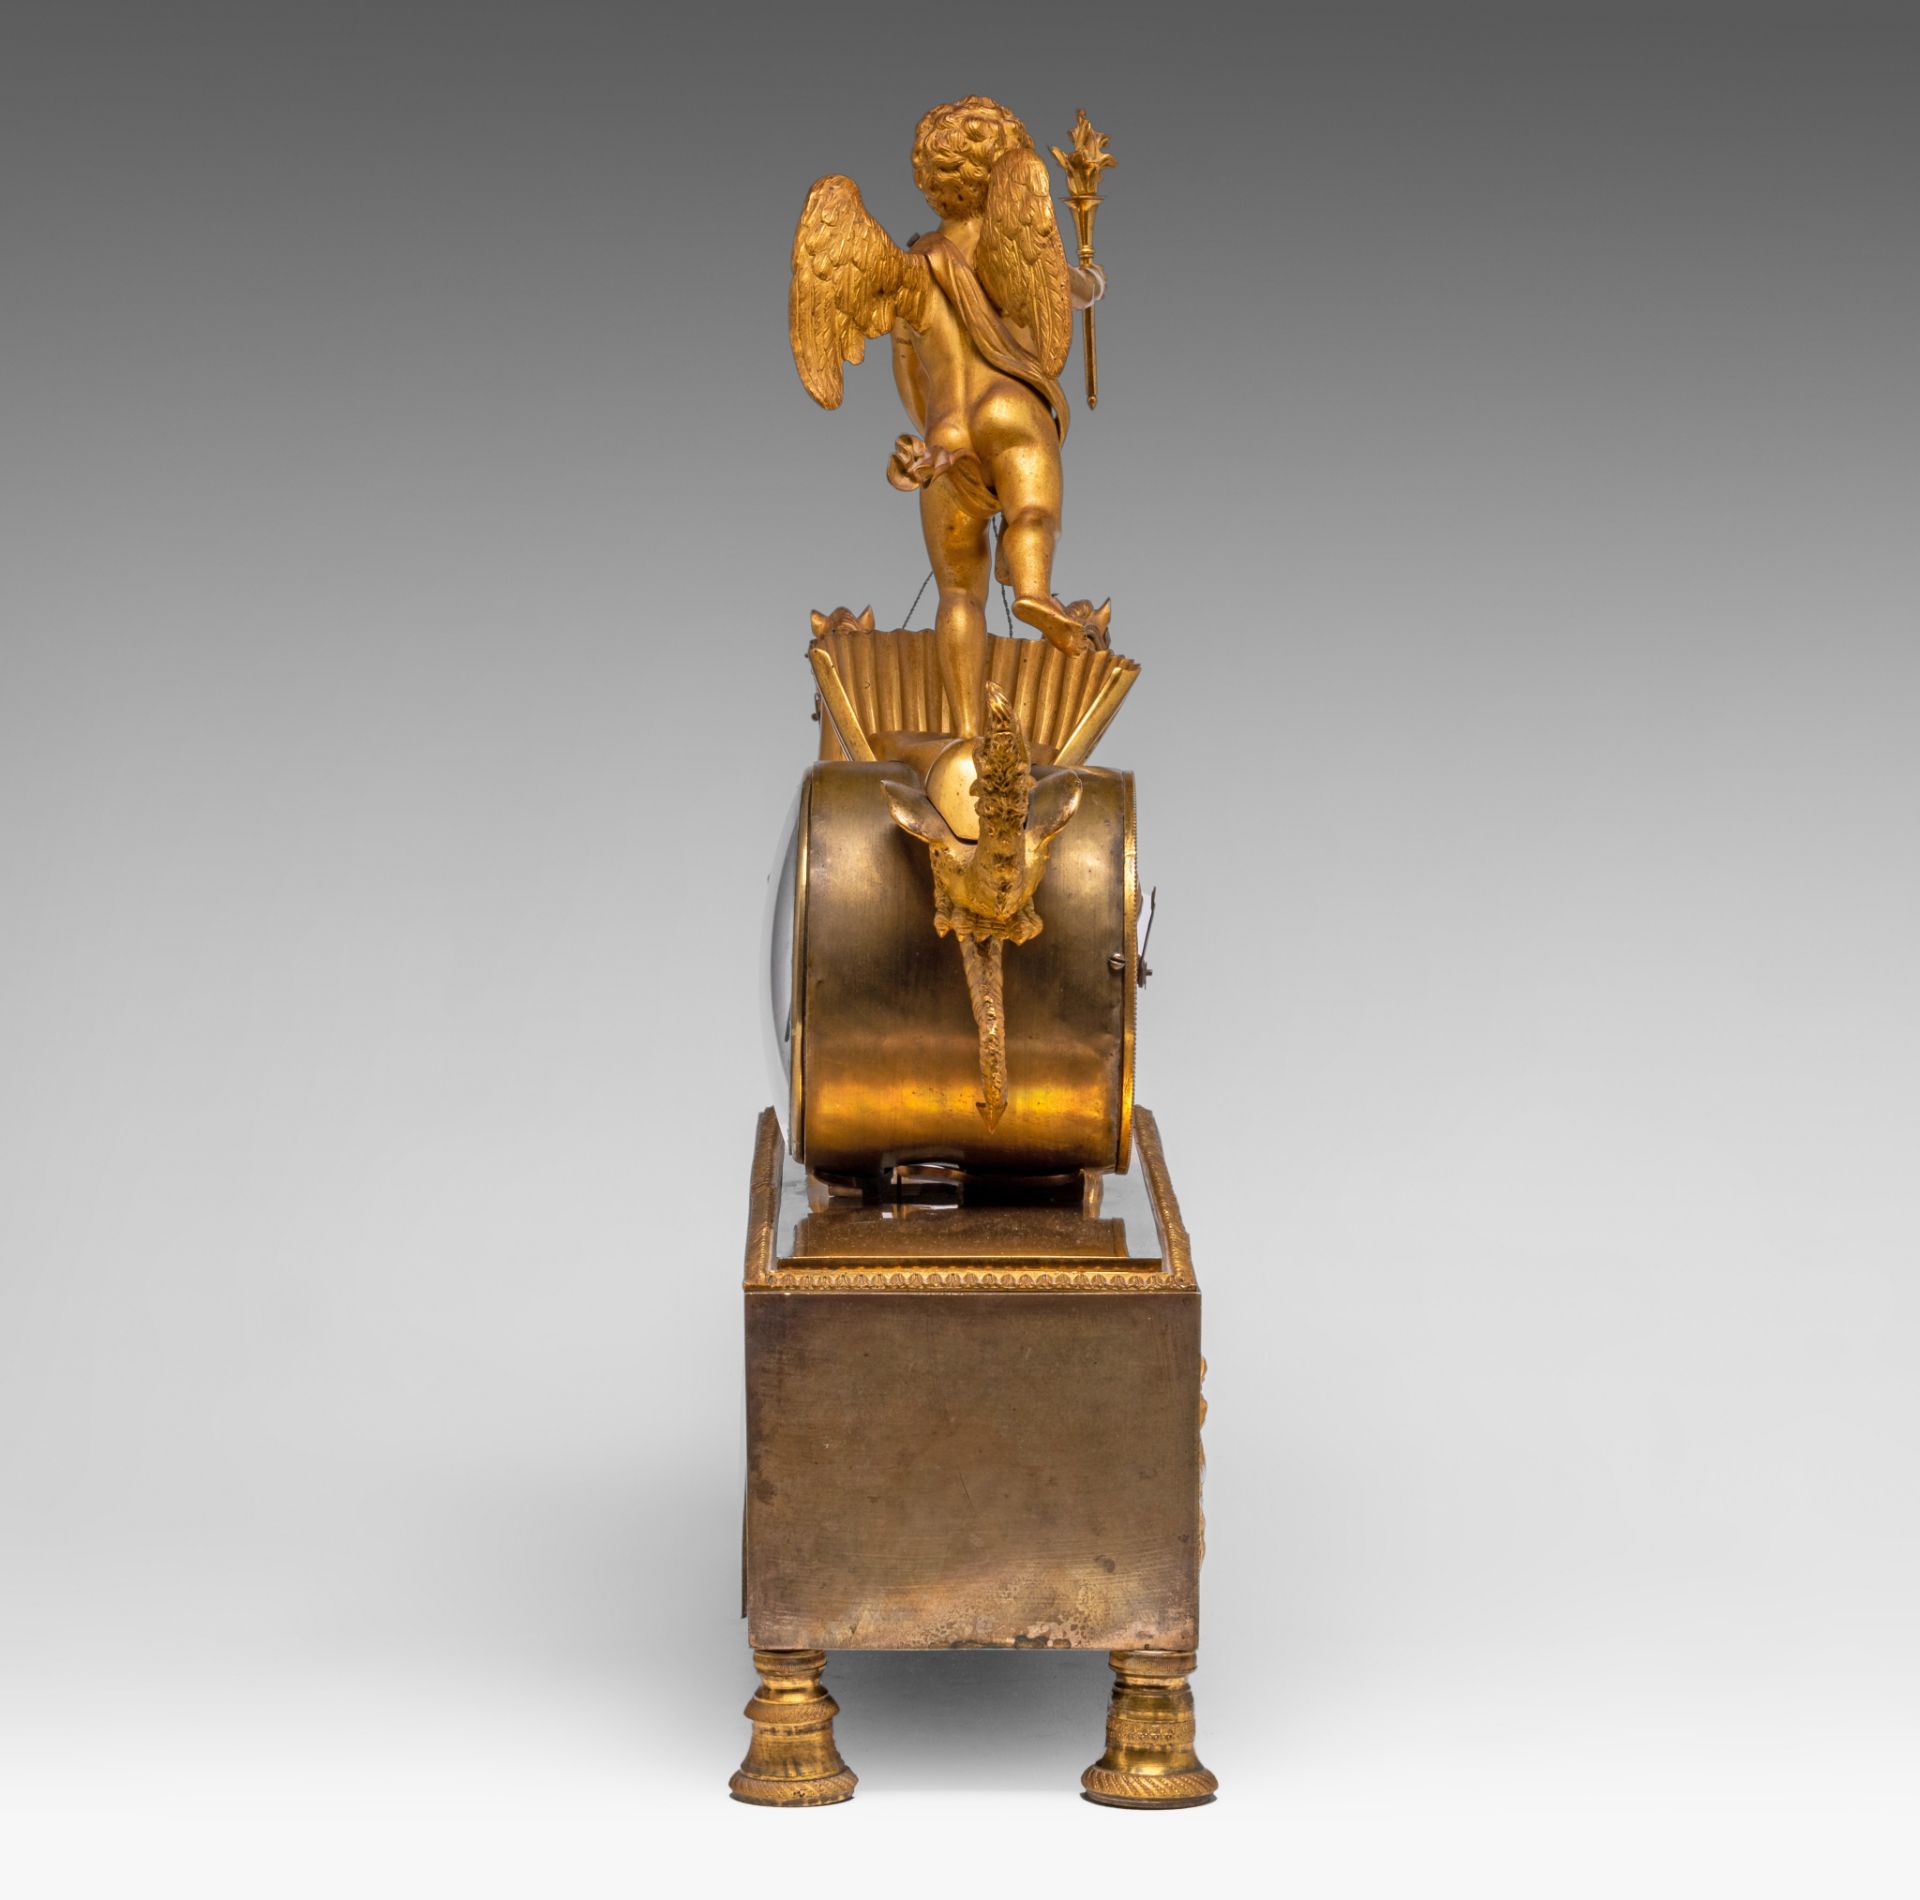 A fine Empire gilt bronze mantle clock of Cupid's chariot, ca. 1810, H 49 - W 46,5 cm - Image 5 of 6